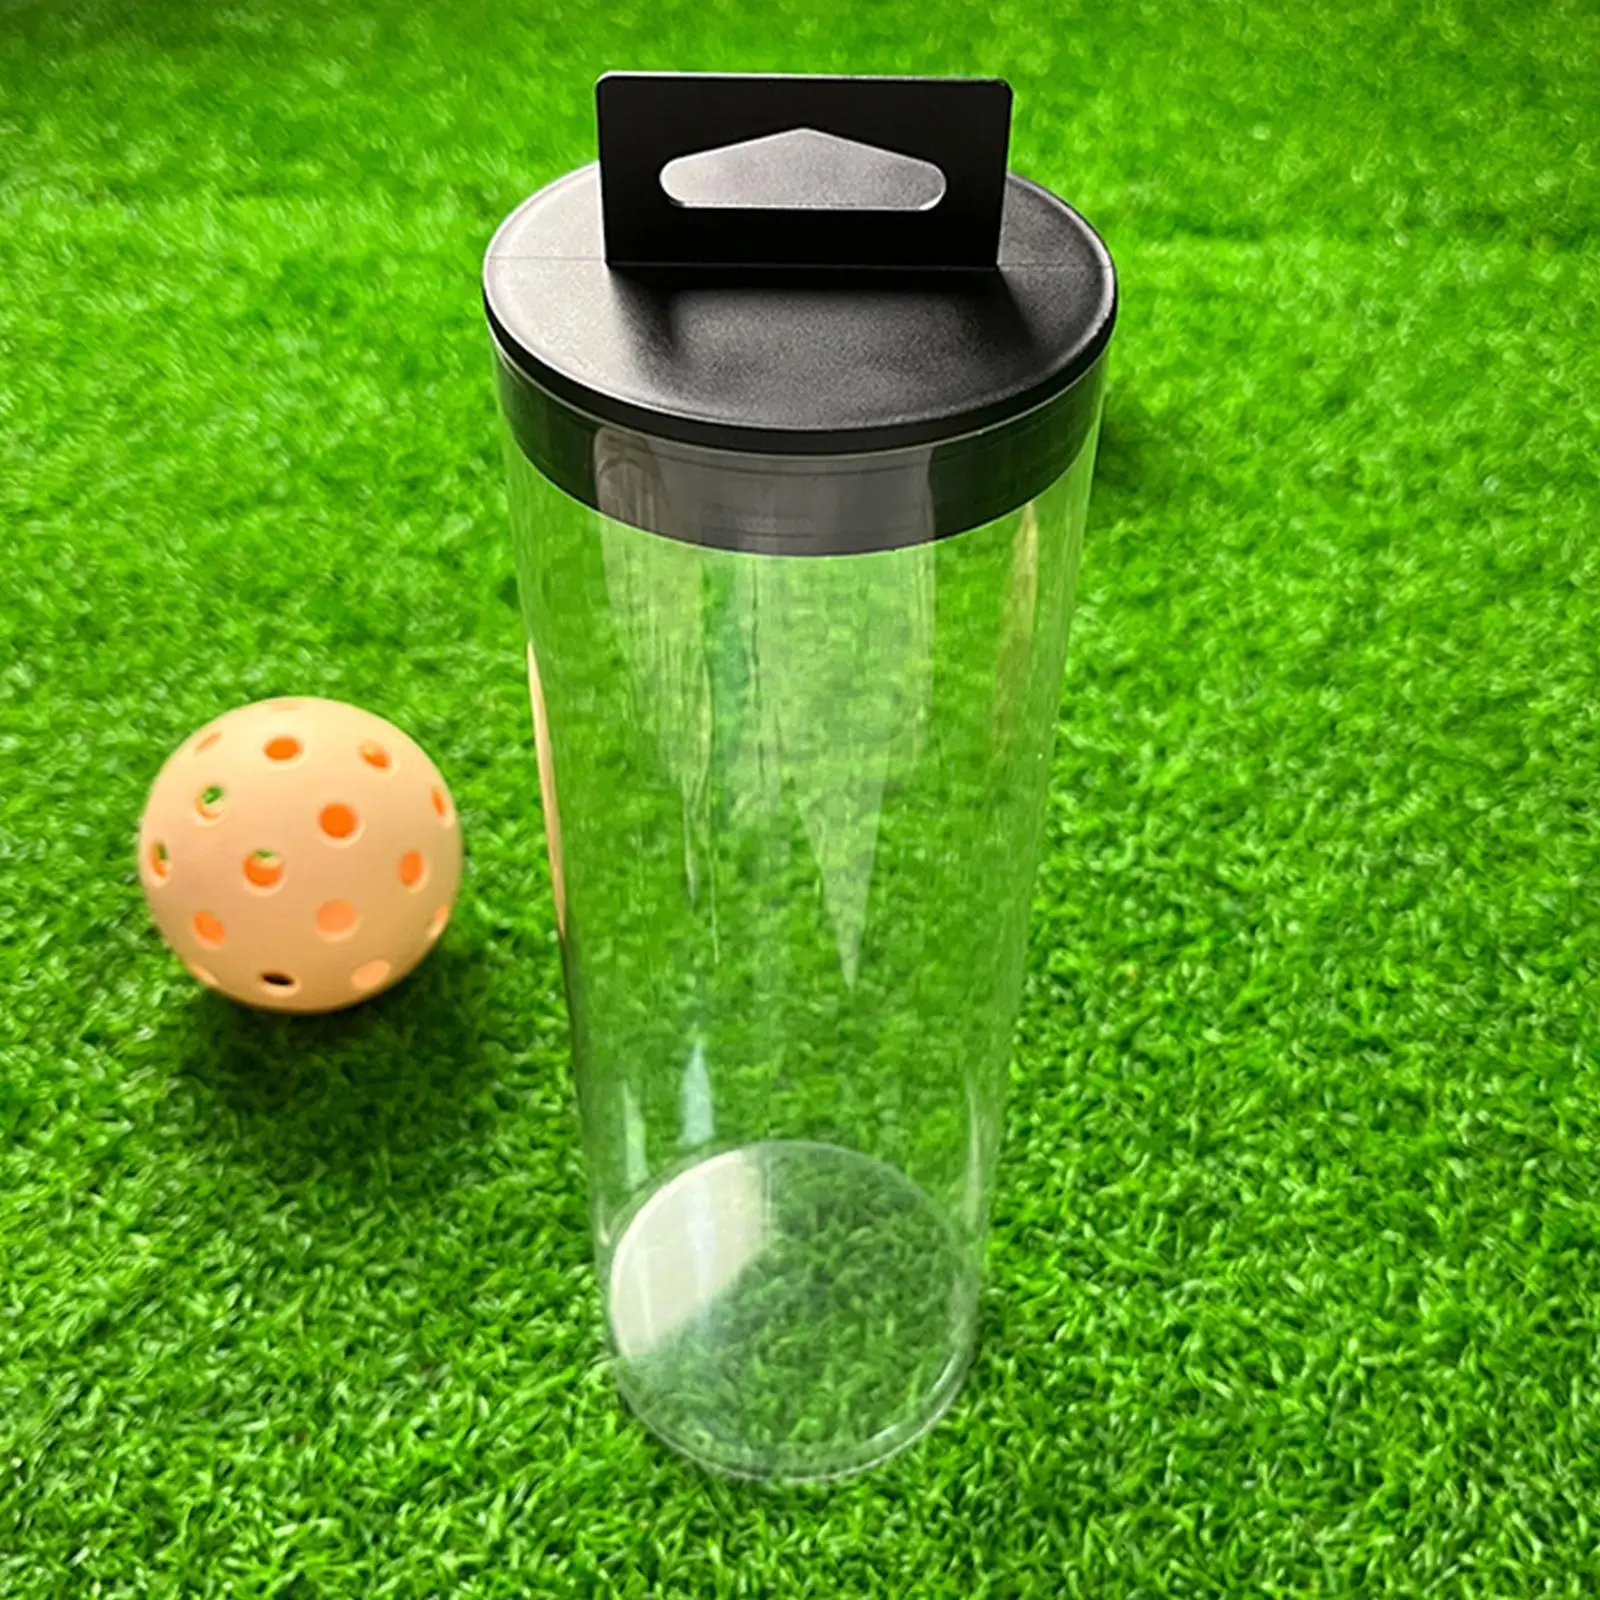 Tennis Ball Organizer Clear Tennis Tube with Cover Carrier Gadgets Durable Ball Container for Golf Practice Training Accessories